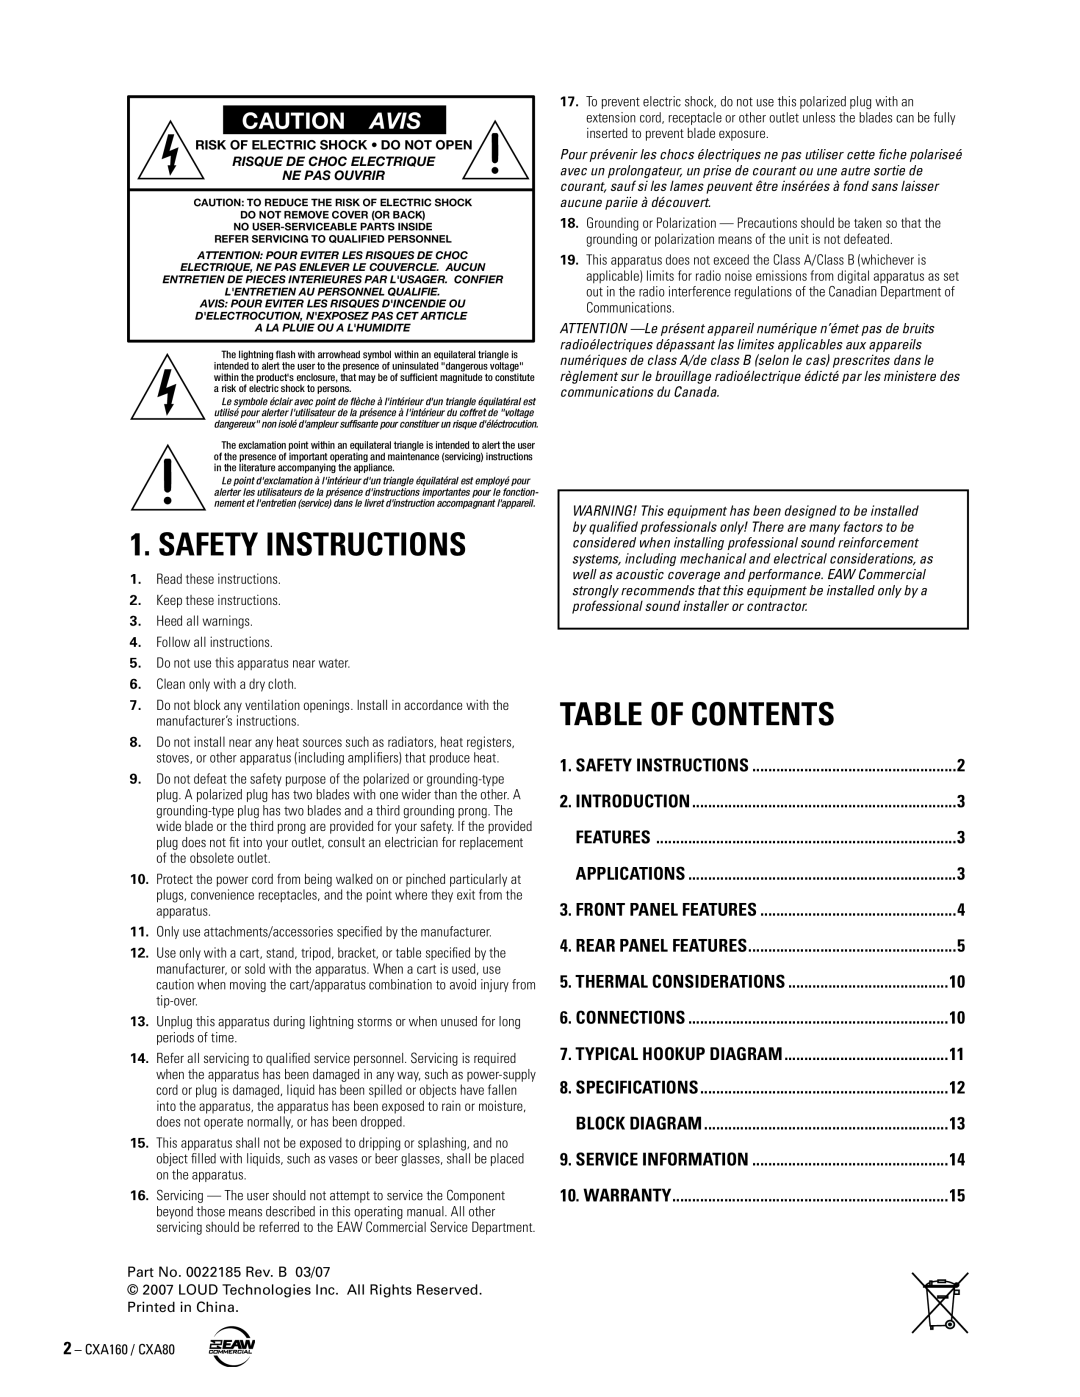 EAW CXA160 / CXA80 Safety Instructions, Table Of Contents, Caution Avis, Connections, Block Diagram, Service Information 